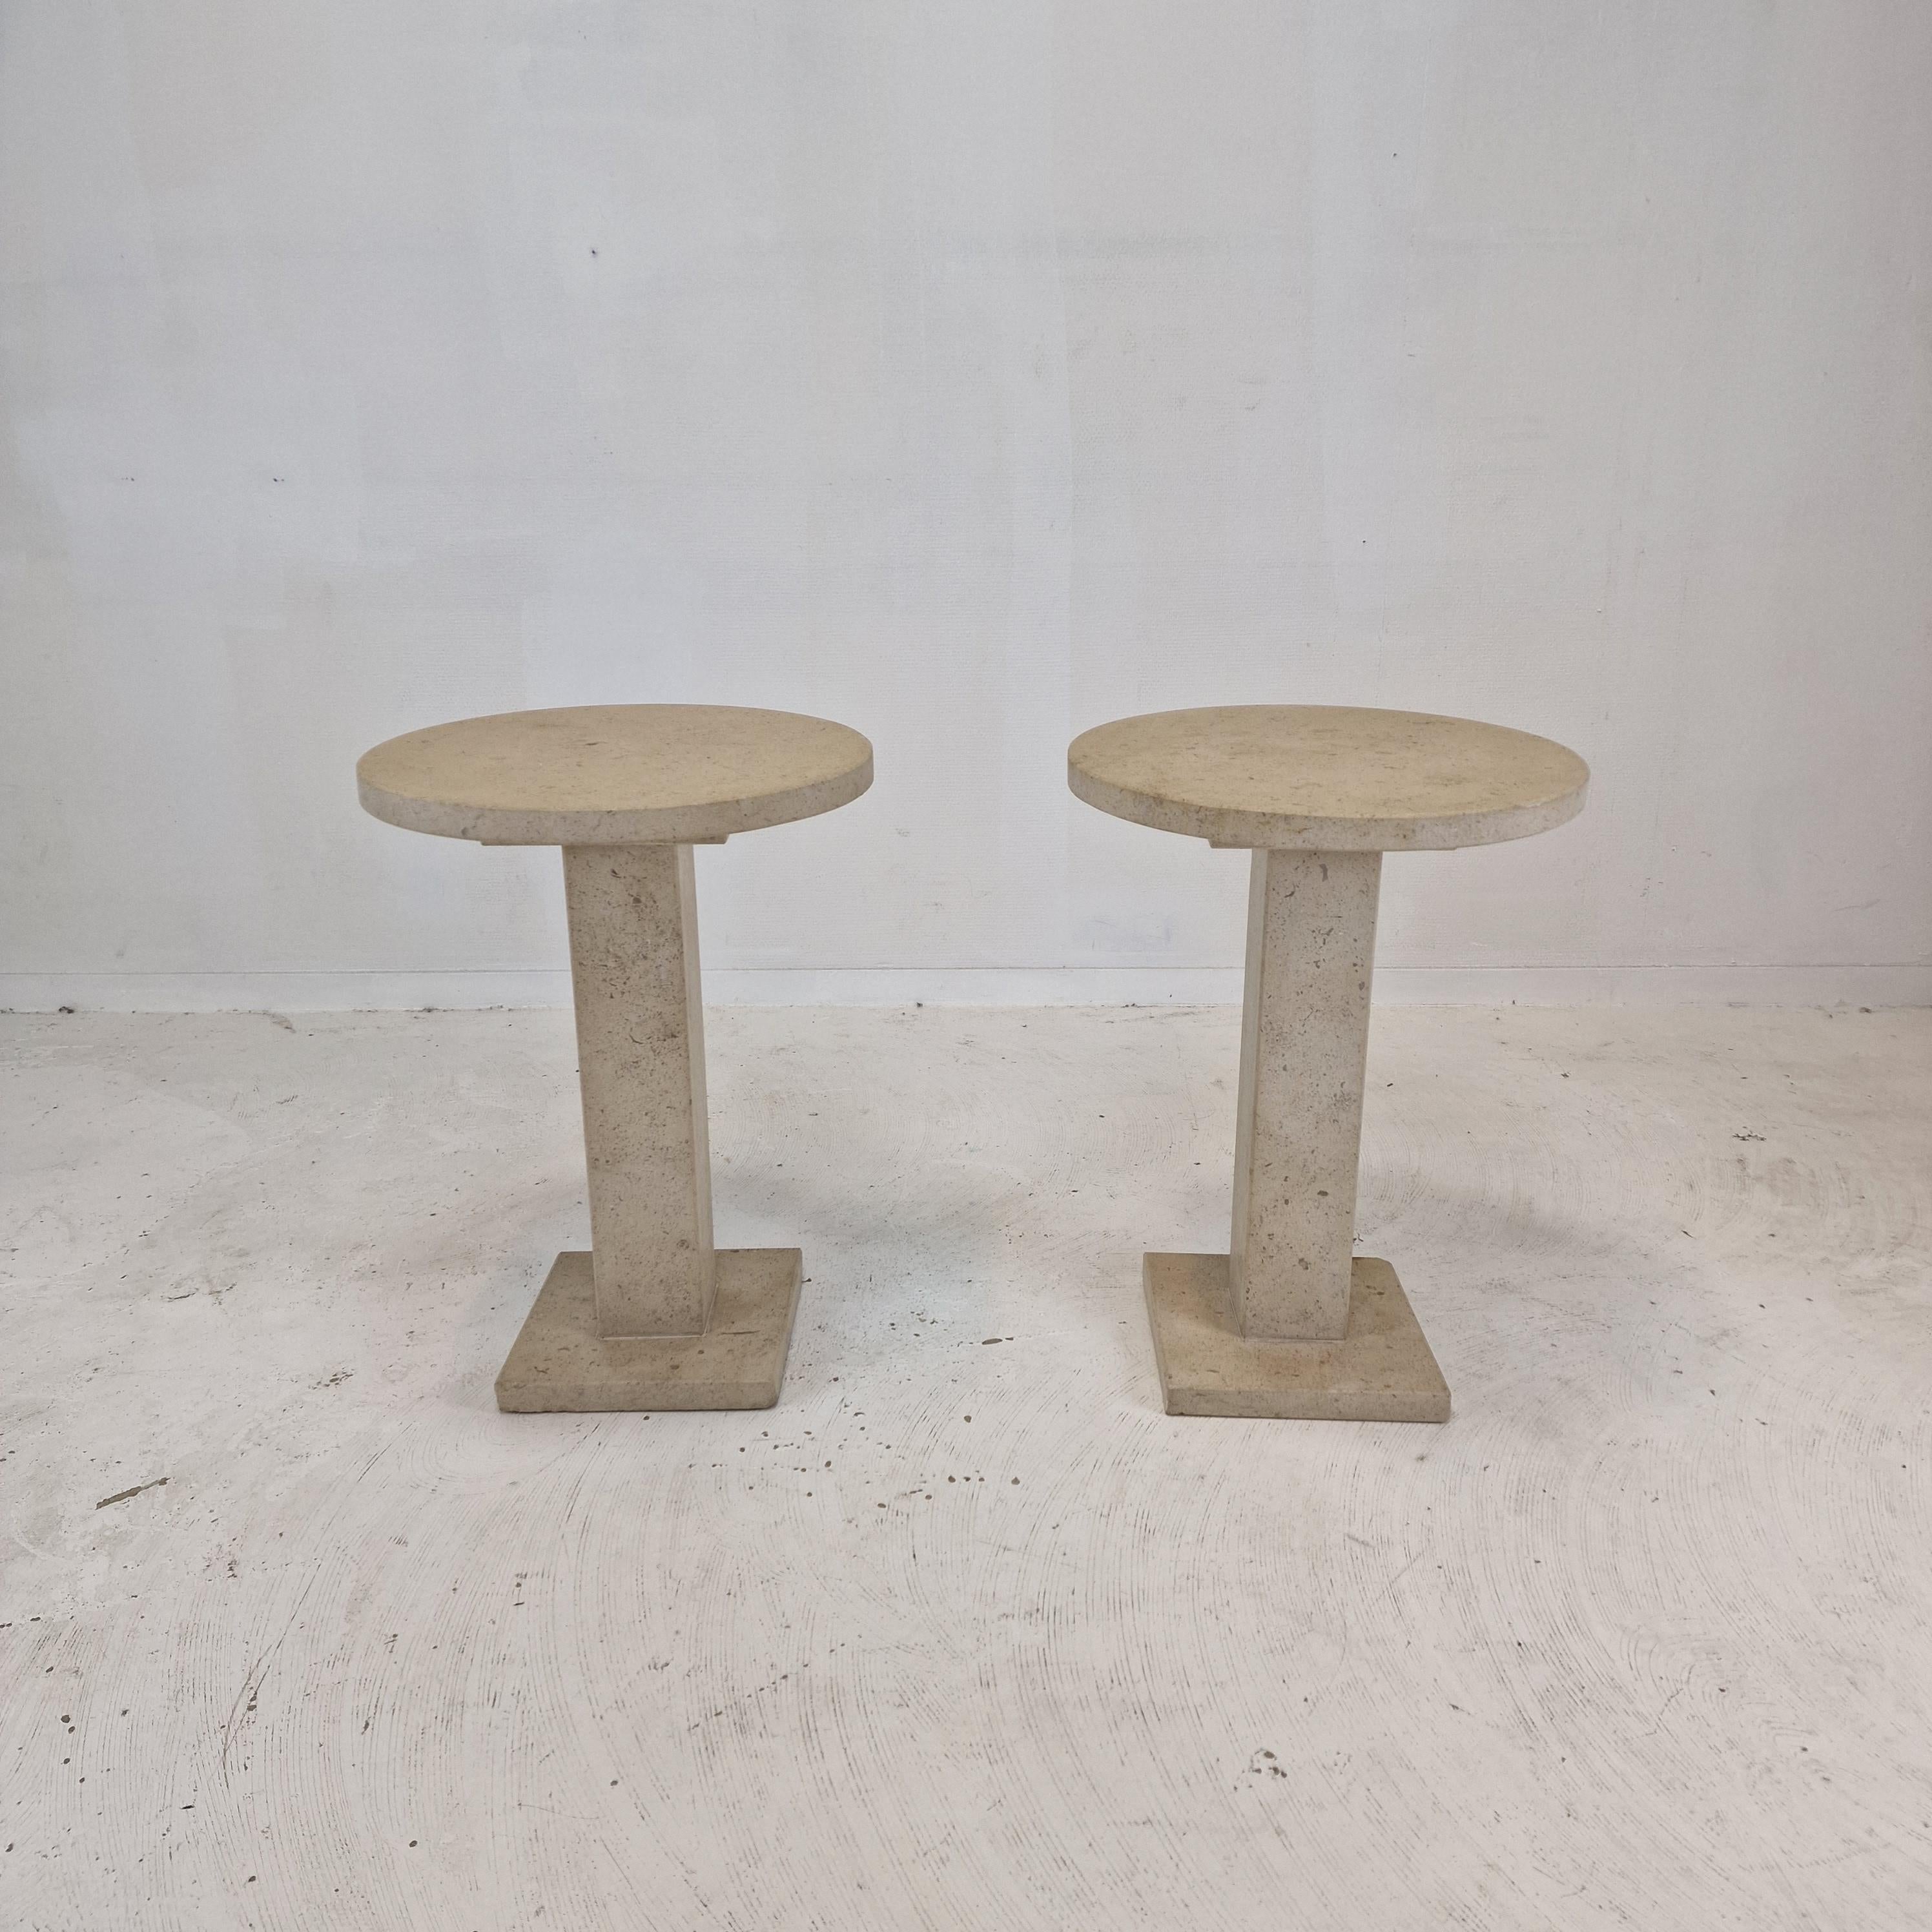 Stunning set of 2 travertine pedestals, fabricated in Italy in the 80s.

This timeless set can be a sculptural piece of art or it can beautifully display whatever object rests upon it. 

We work with professional packers and shippers, we can